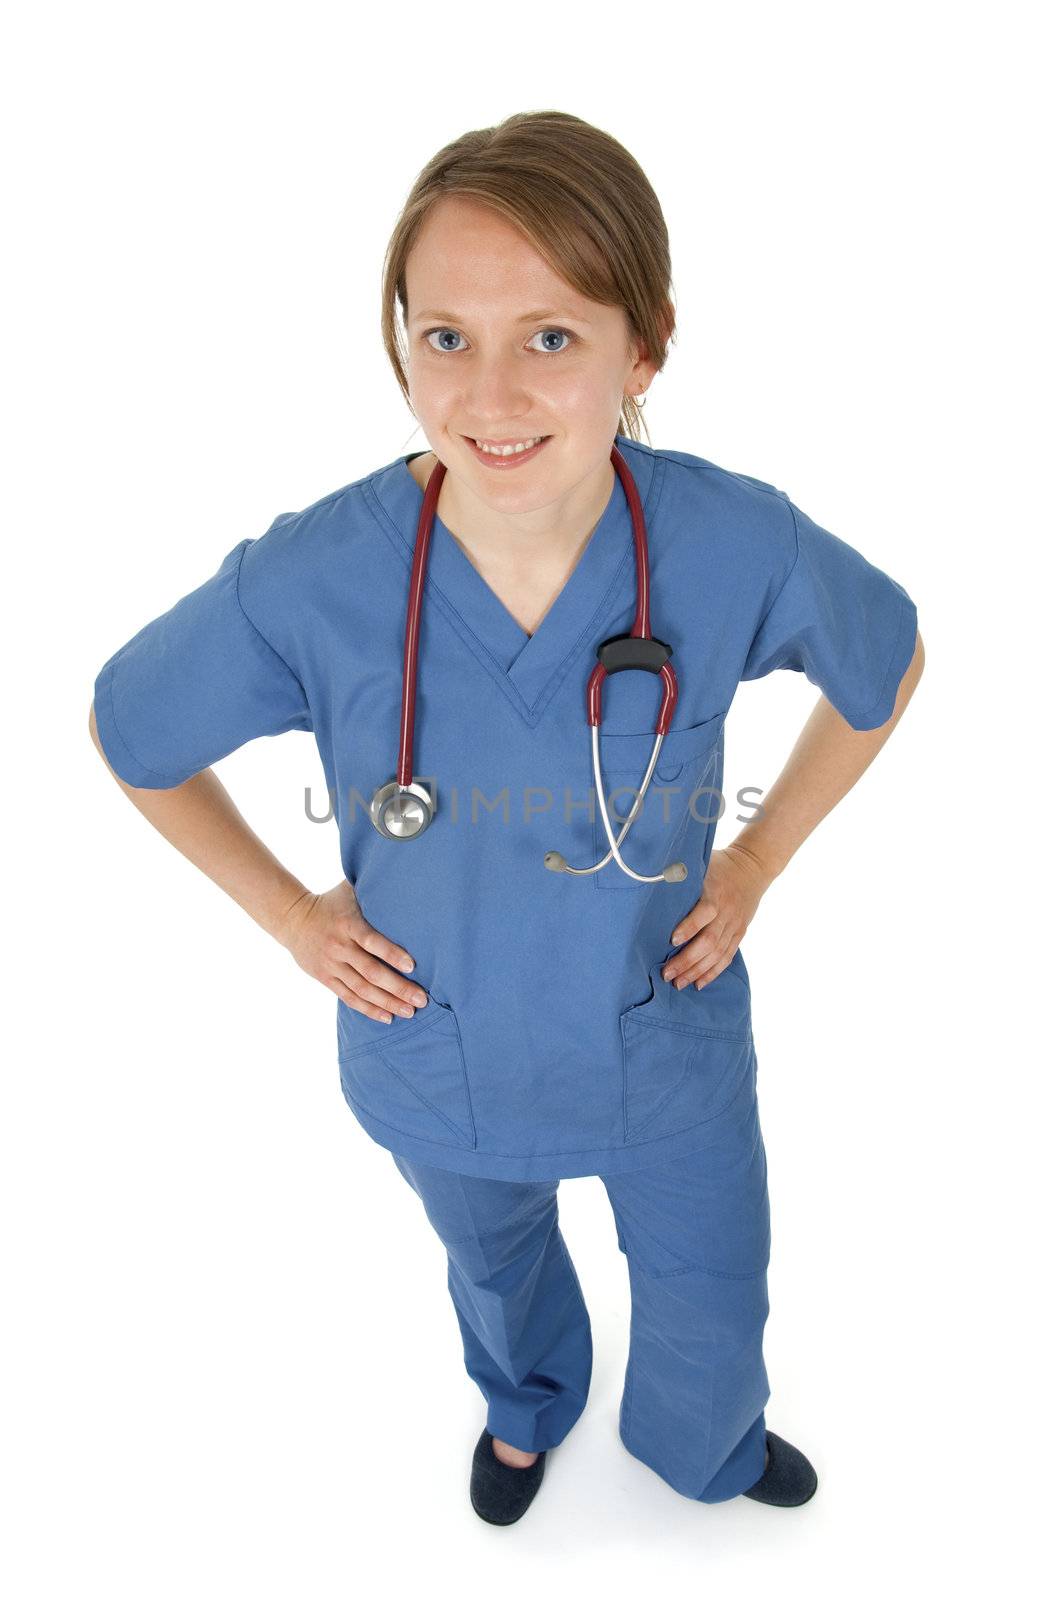 Smiling young nurse in blue uniform, on white background.